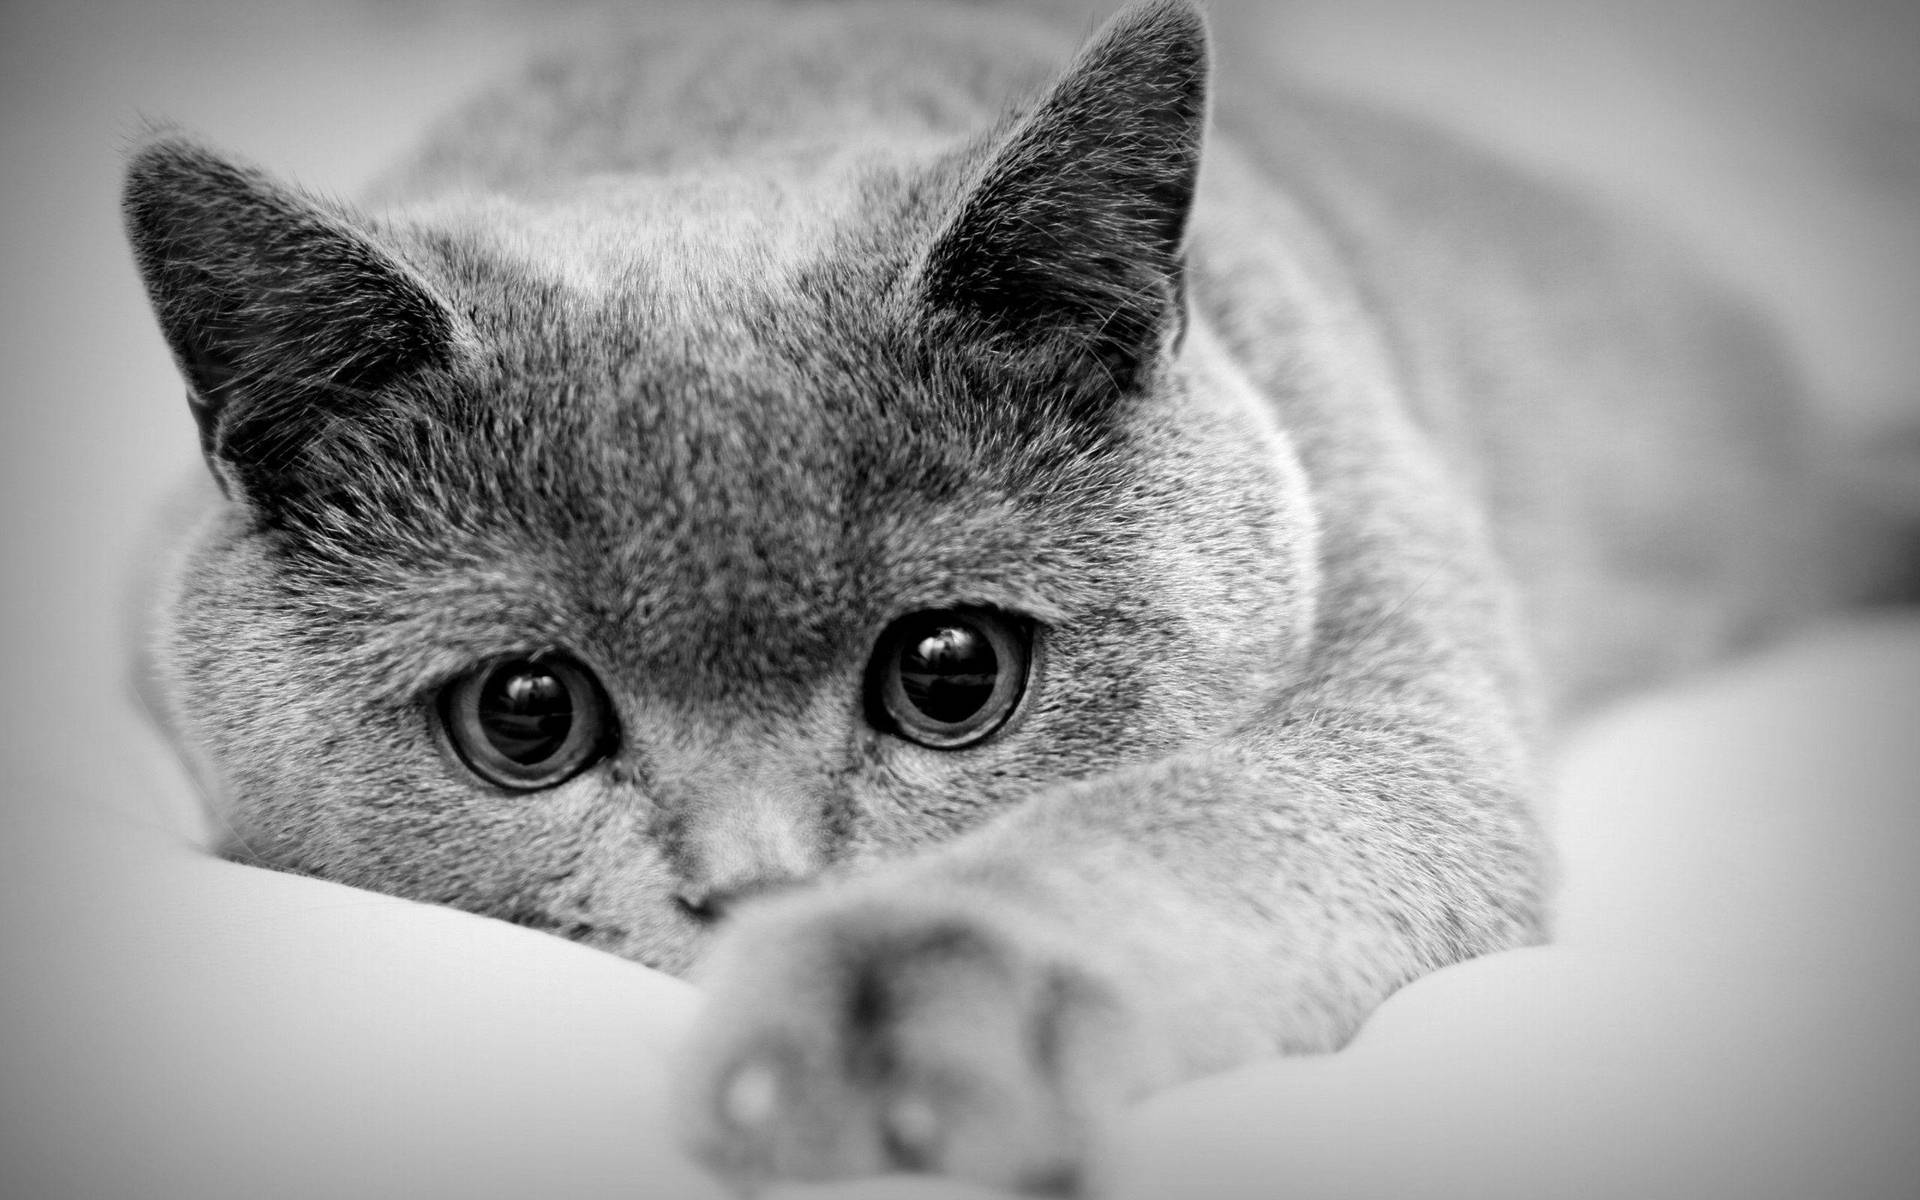 Free Black And White Cat Wallpaper Downloads, [100+] Black And White Cat  Wallpapers for FREE 